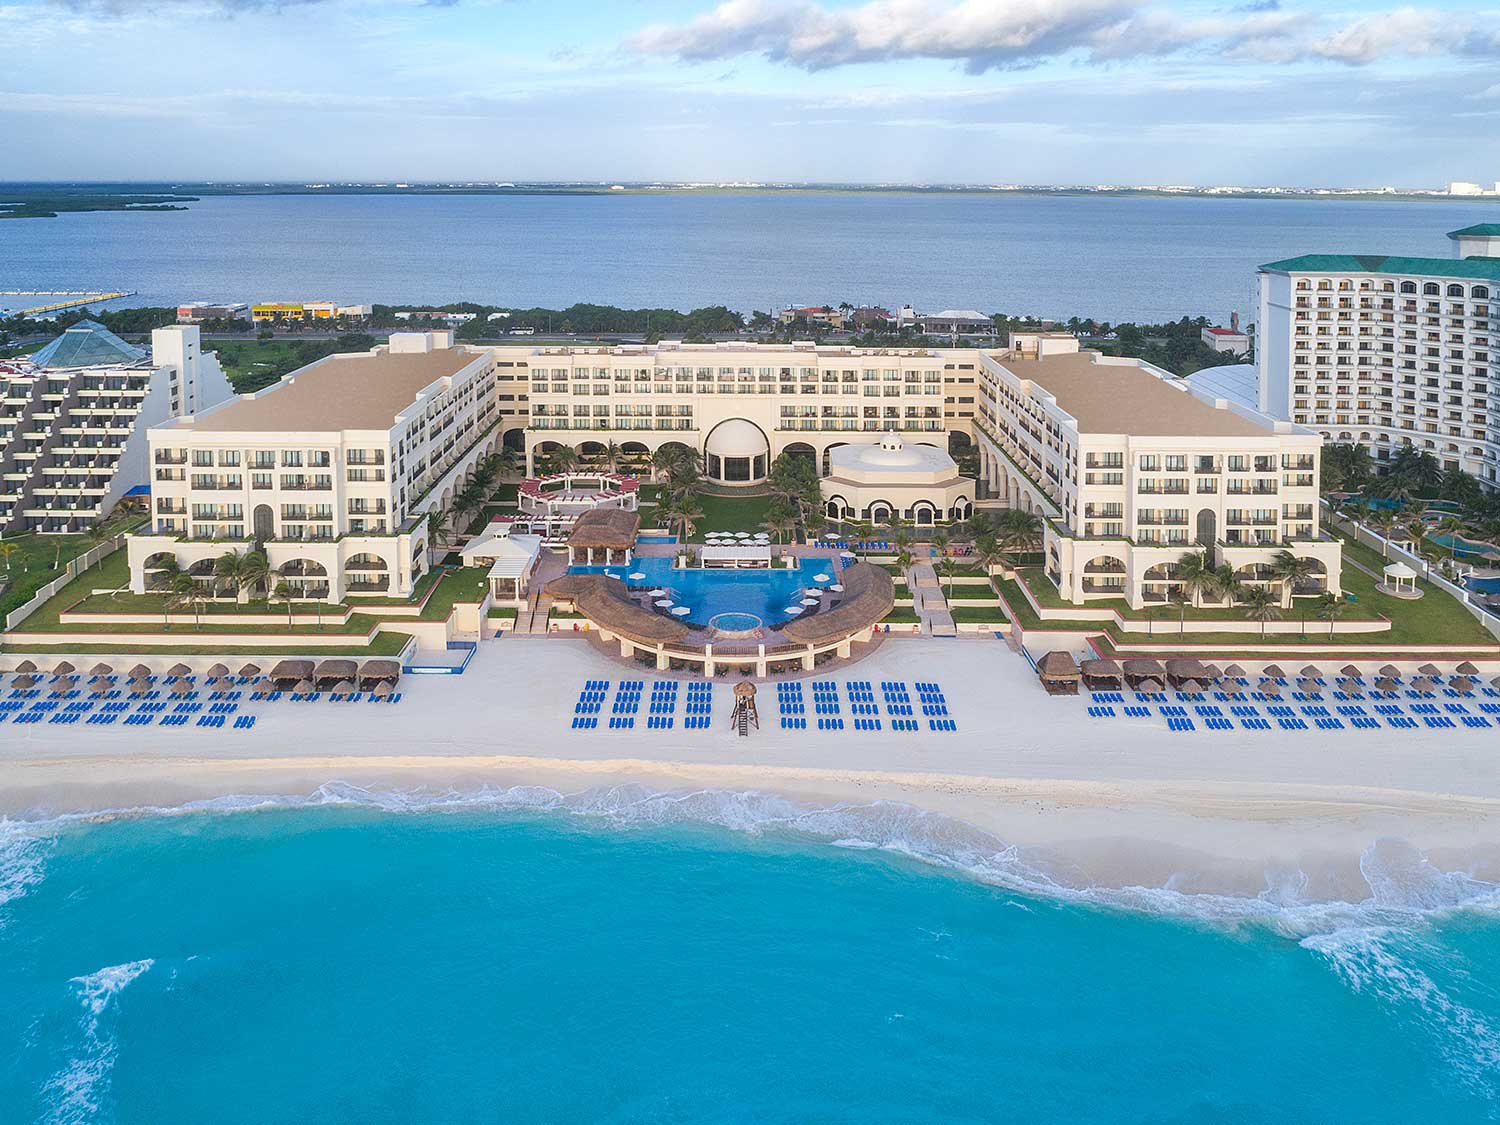 Aerial photo of Marriot Cancun Resort.